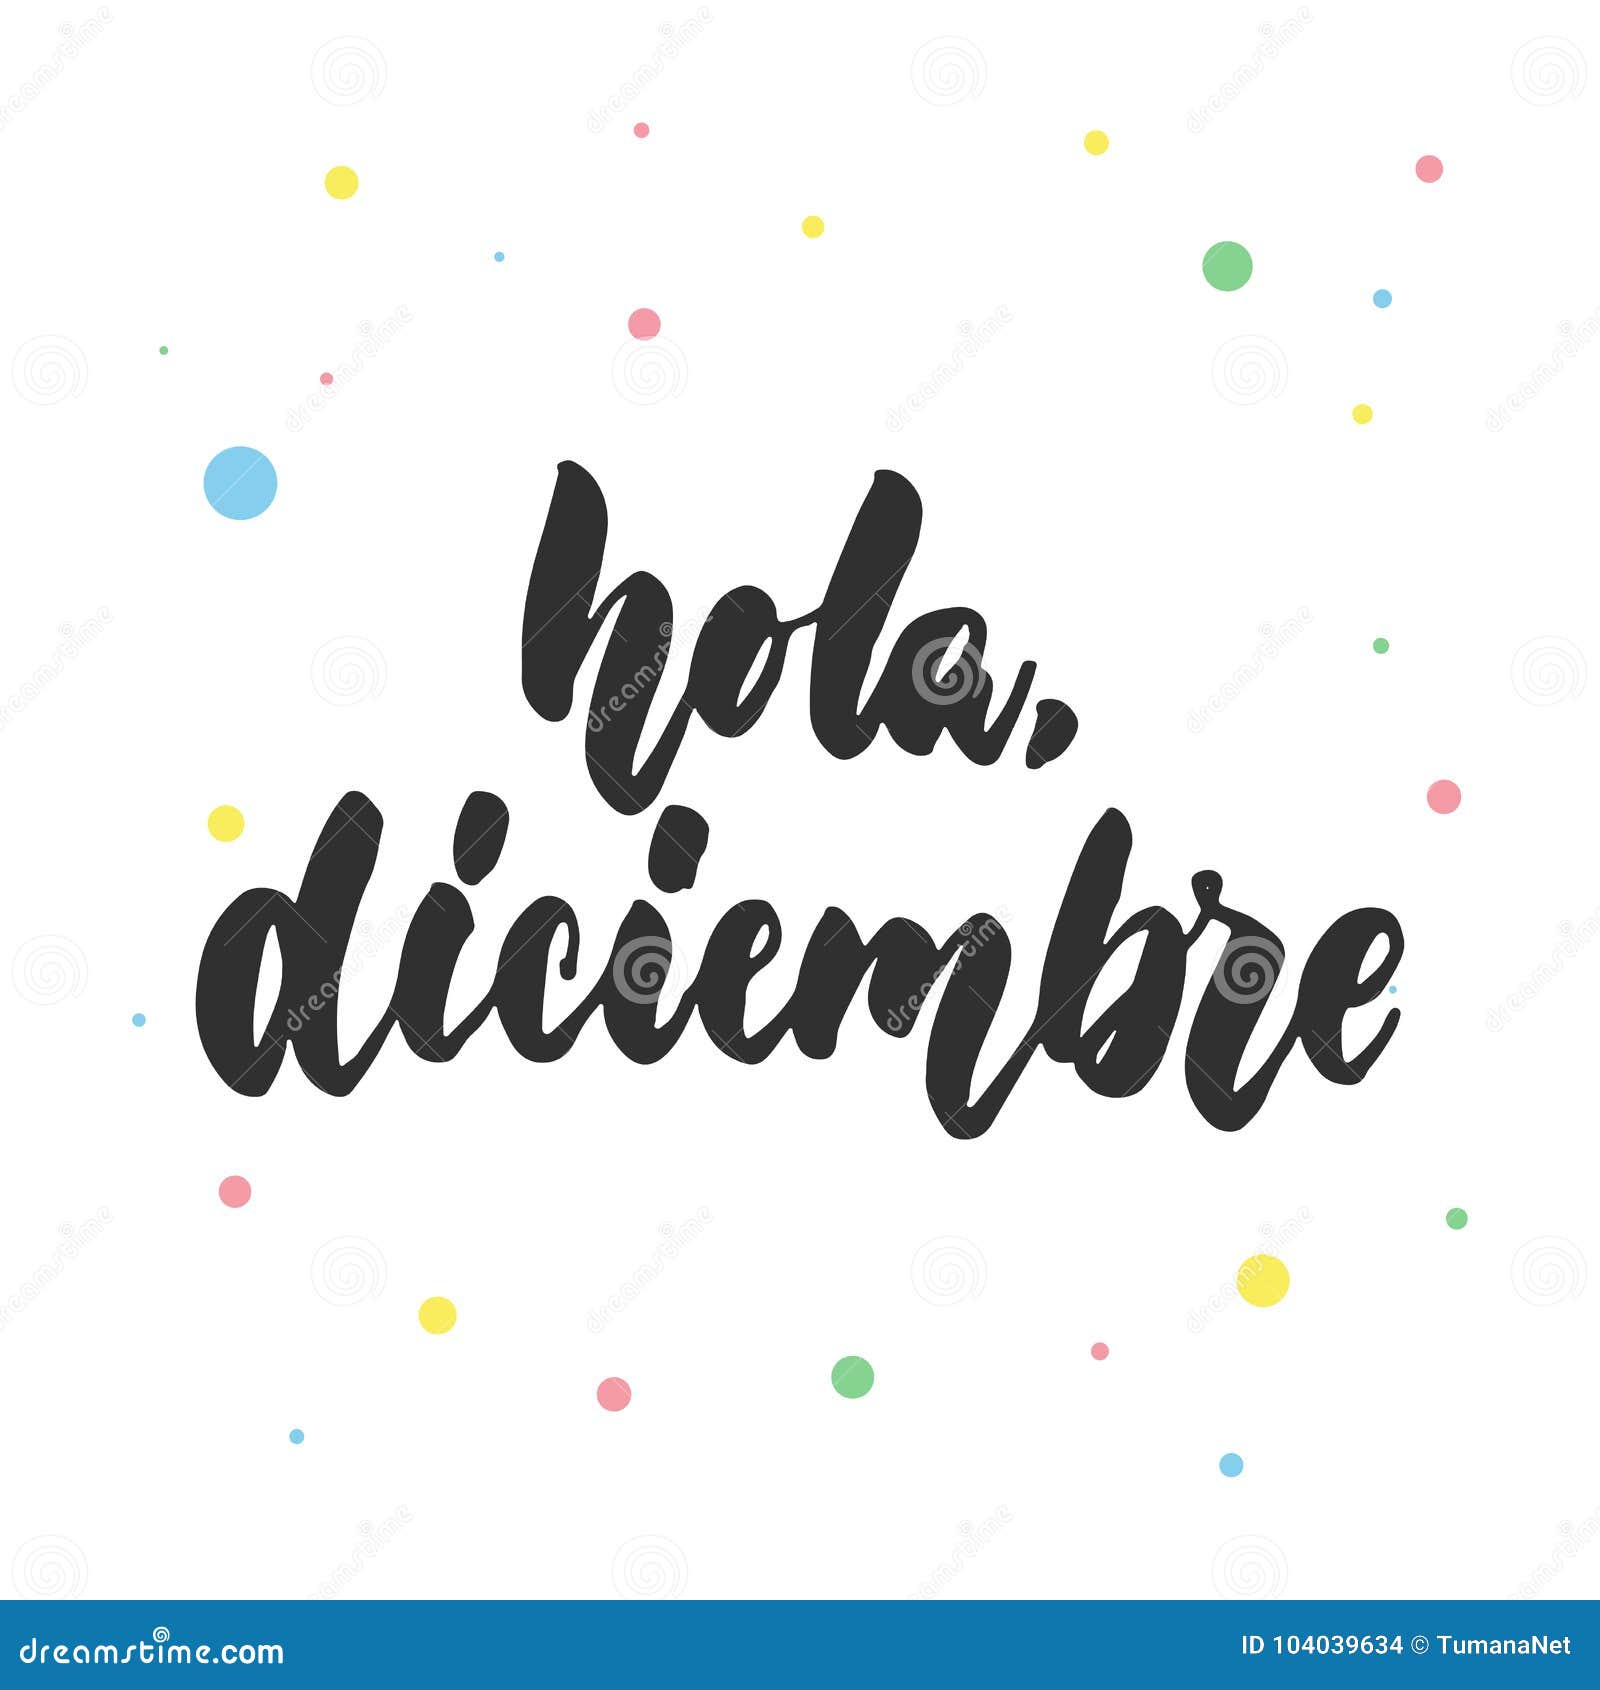 hola, diciembre - hello, december in spanish, hand drawn latin lettering quote with colorful circles 